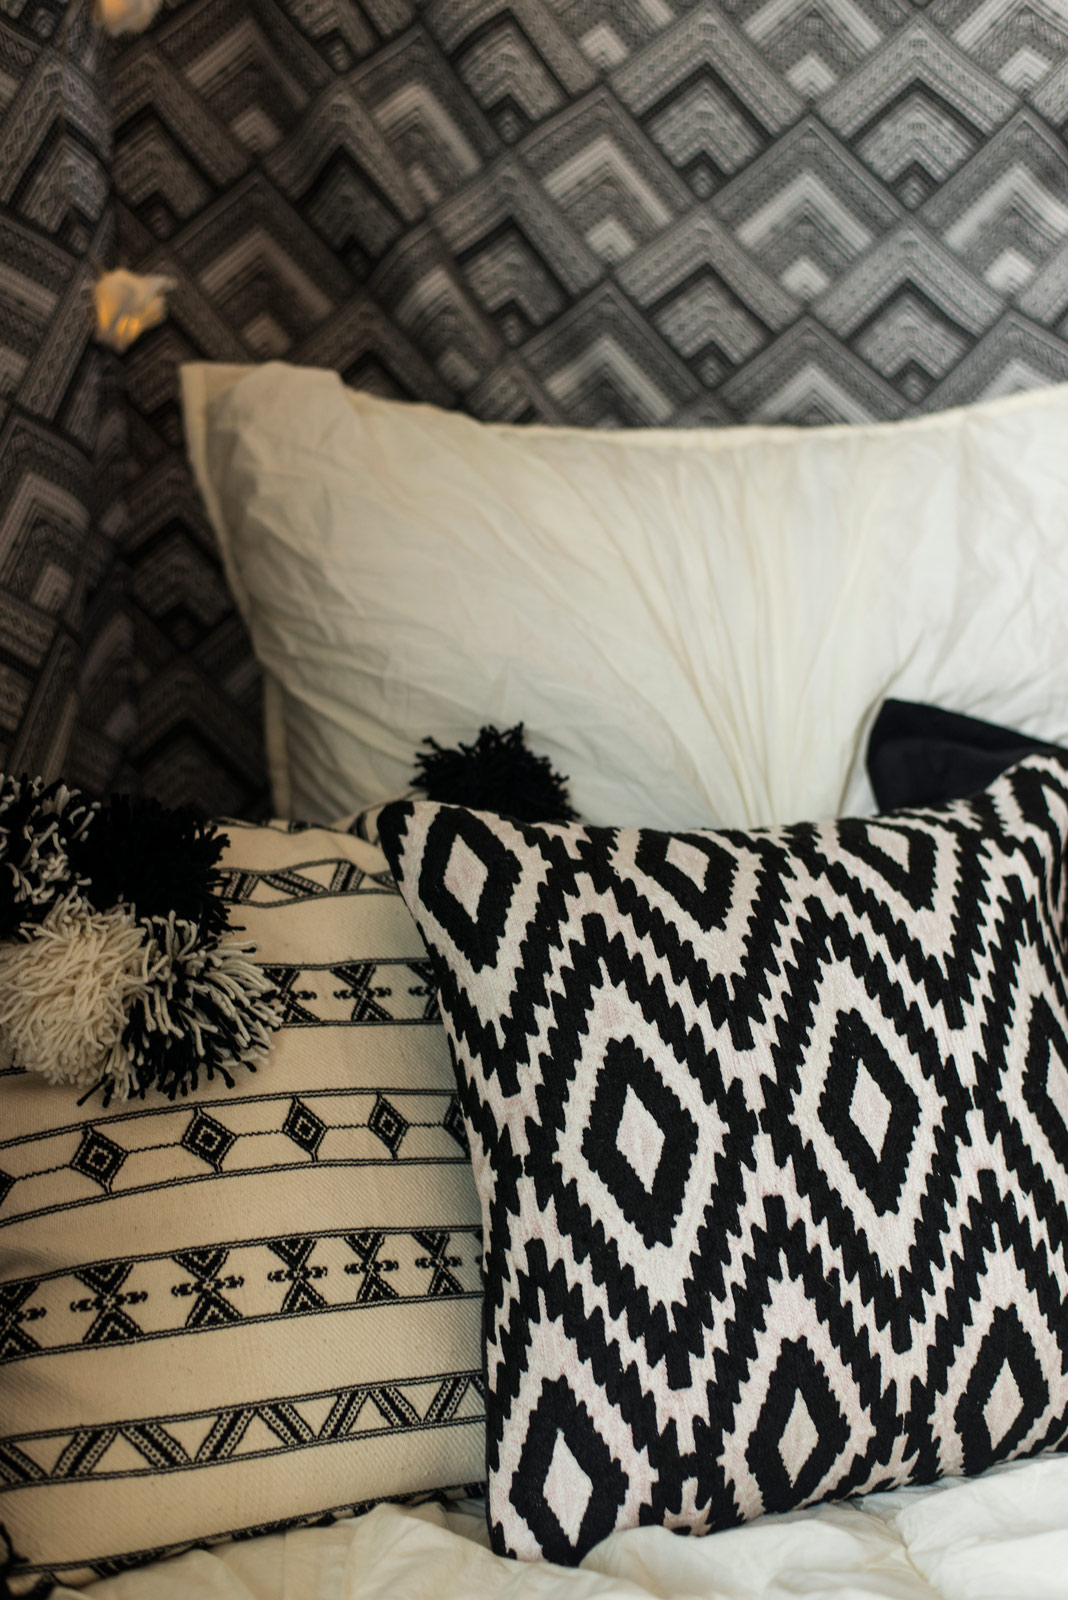 Small Monochromatic Bedroom Design in Black & White Colour Combination With Textures & Patterns - Beautiful Homes